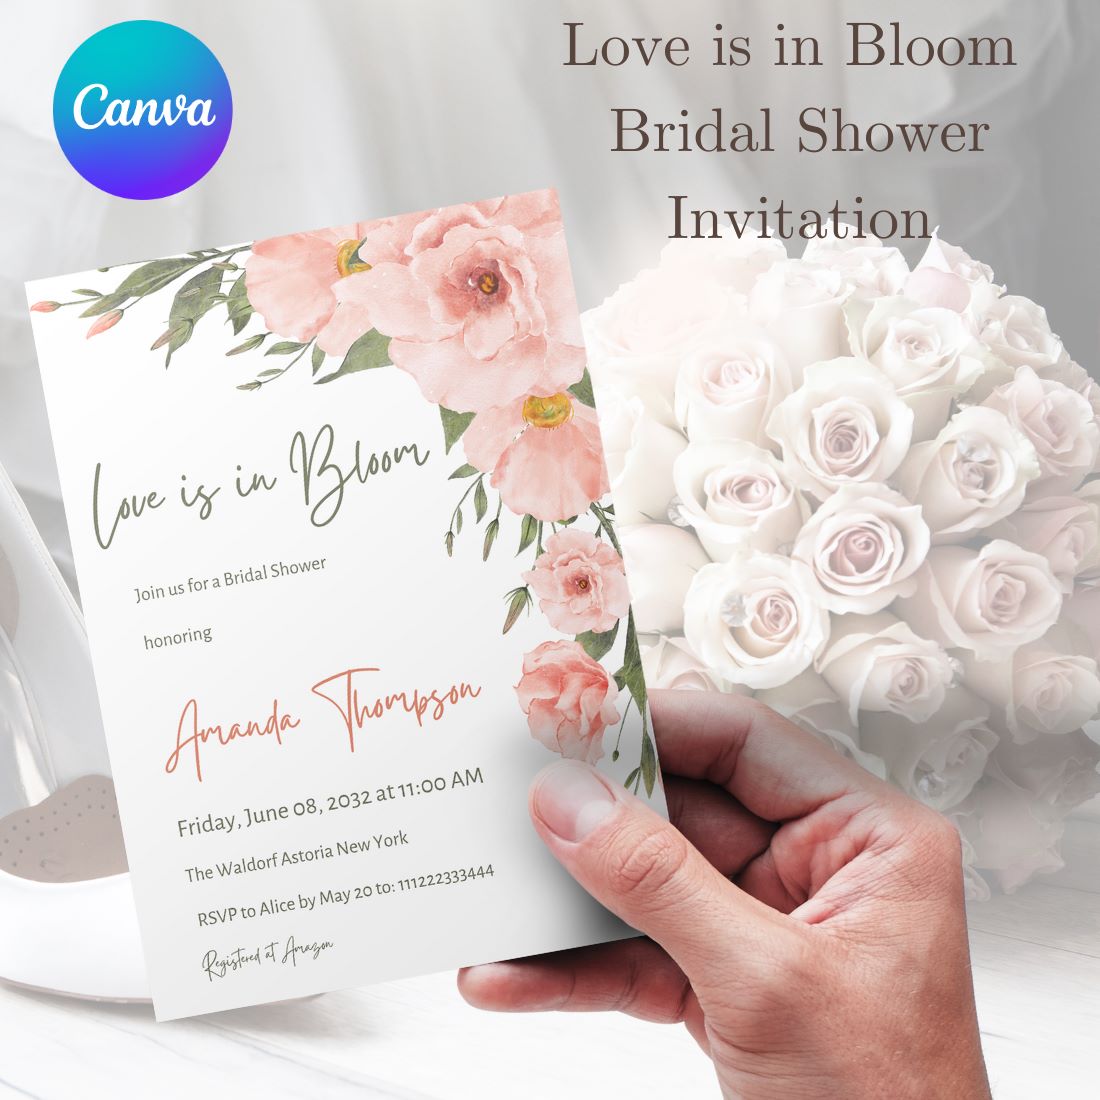 Love is in Bloom Watercolor Floral Bridal Shower Invitation cover image.